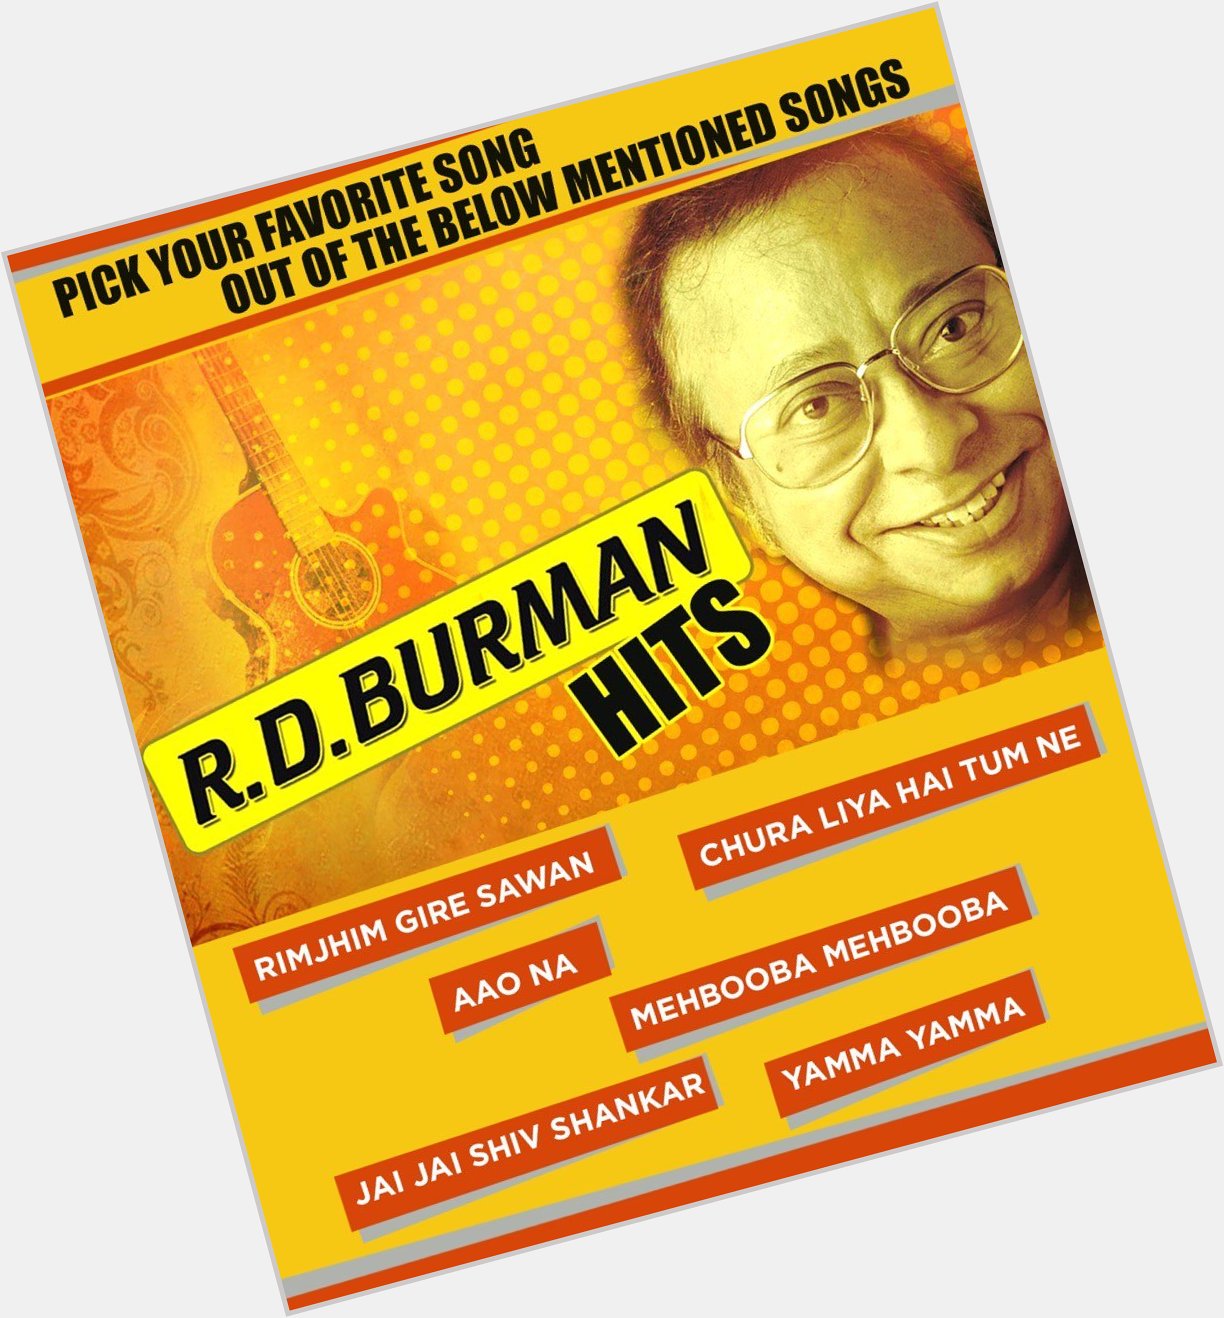 We wish R D Burman a very happy birthday! 
Pick your favorite song of R D Burman from the image below. 